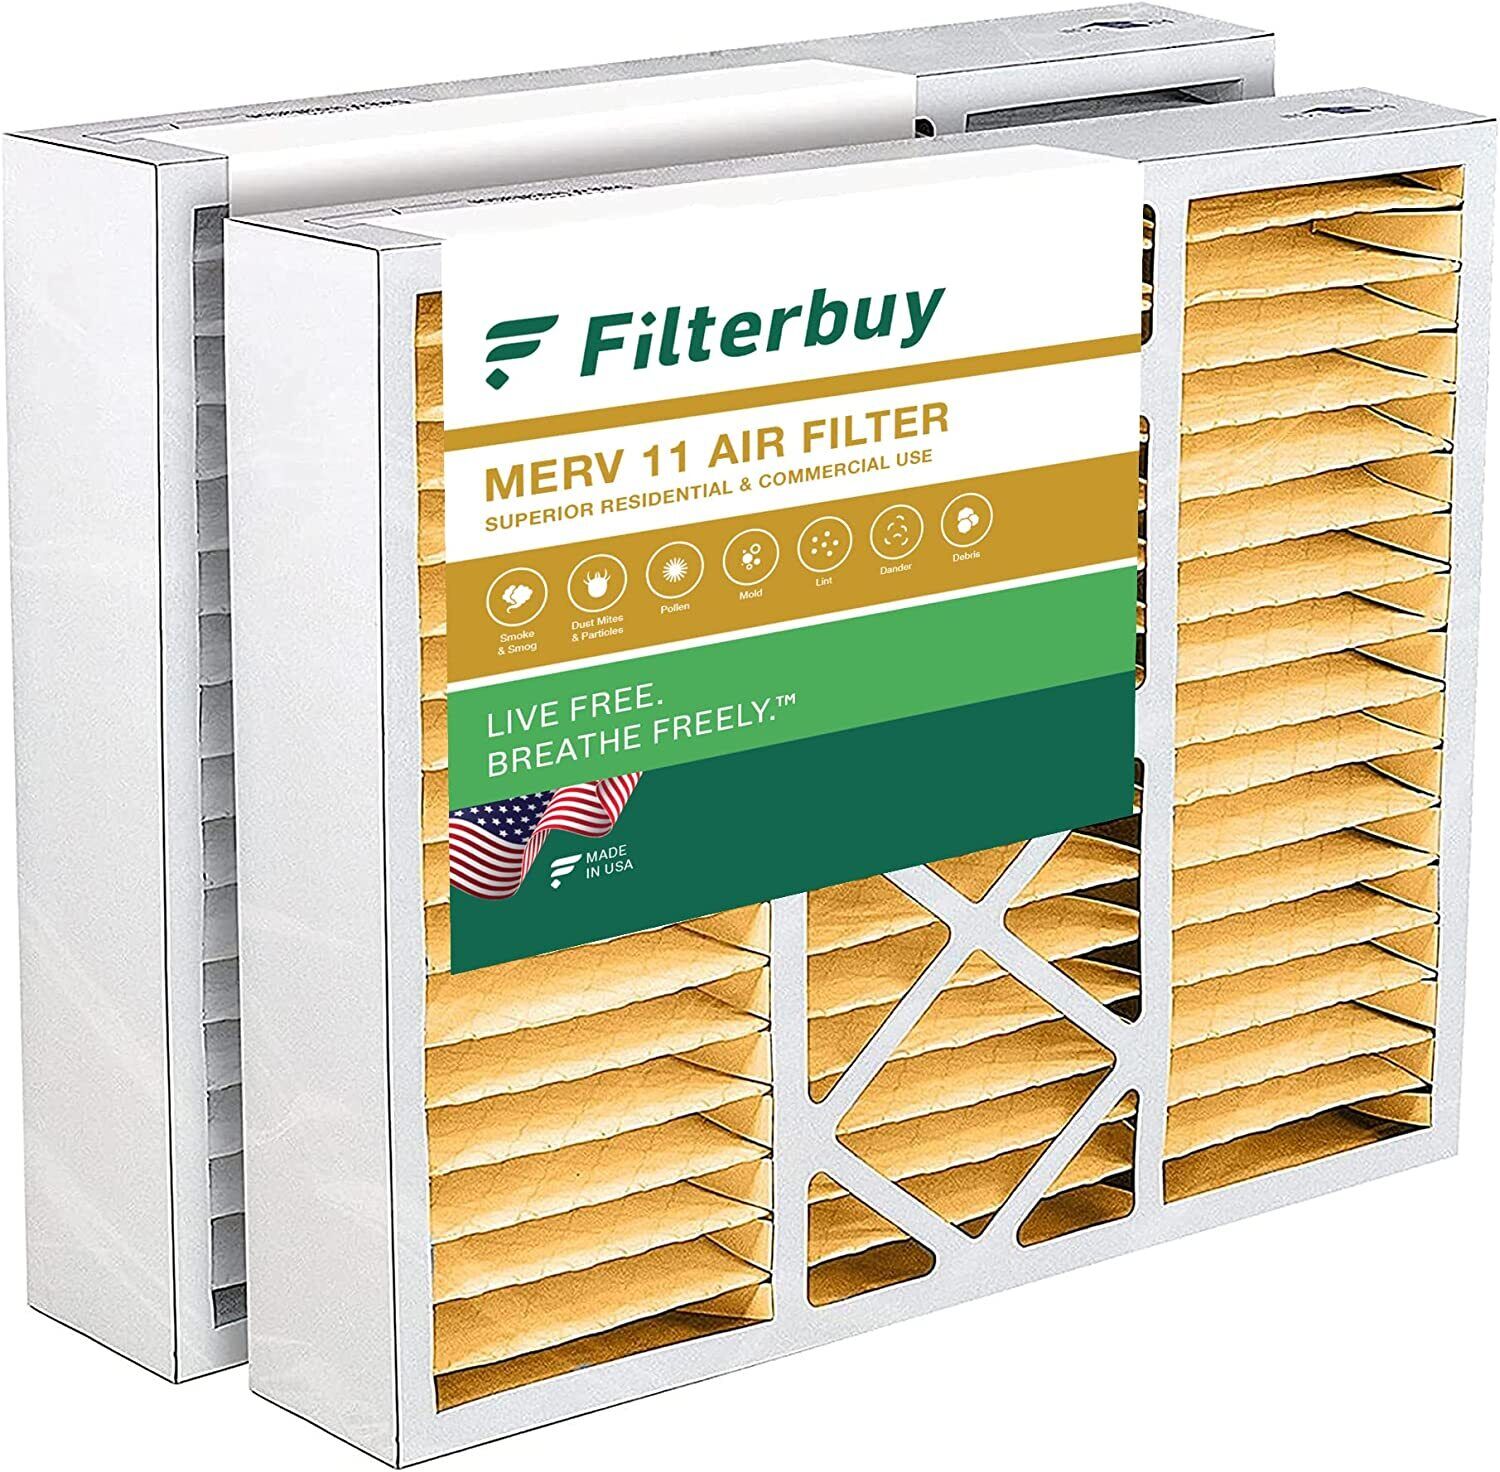 Filterbuy 20x25x5 Air Filters, AC Furnace Replacement for Honeywell (MERV 11)